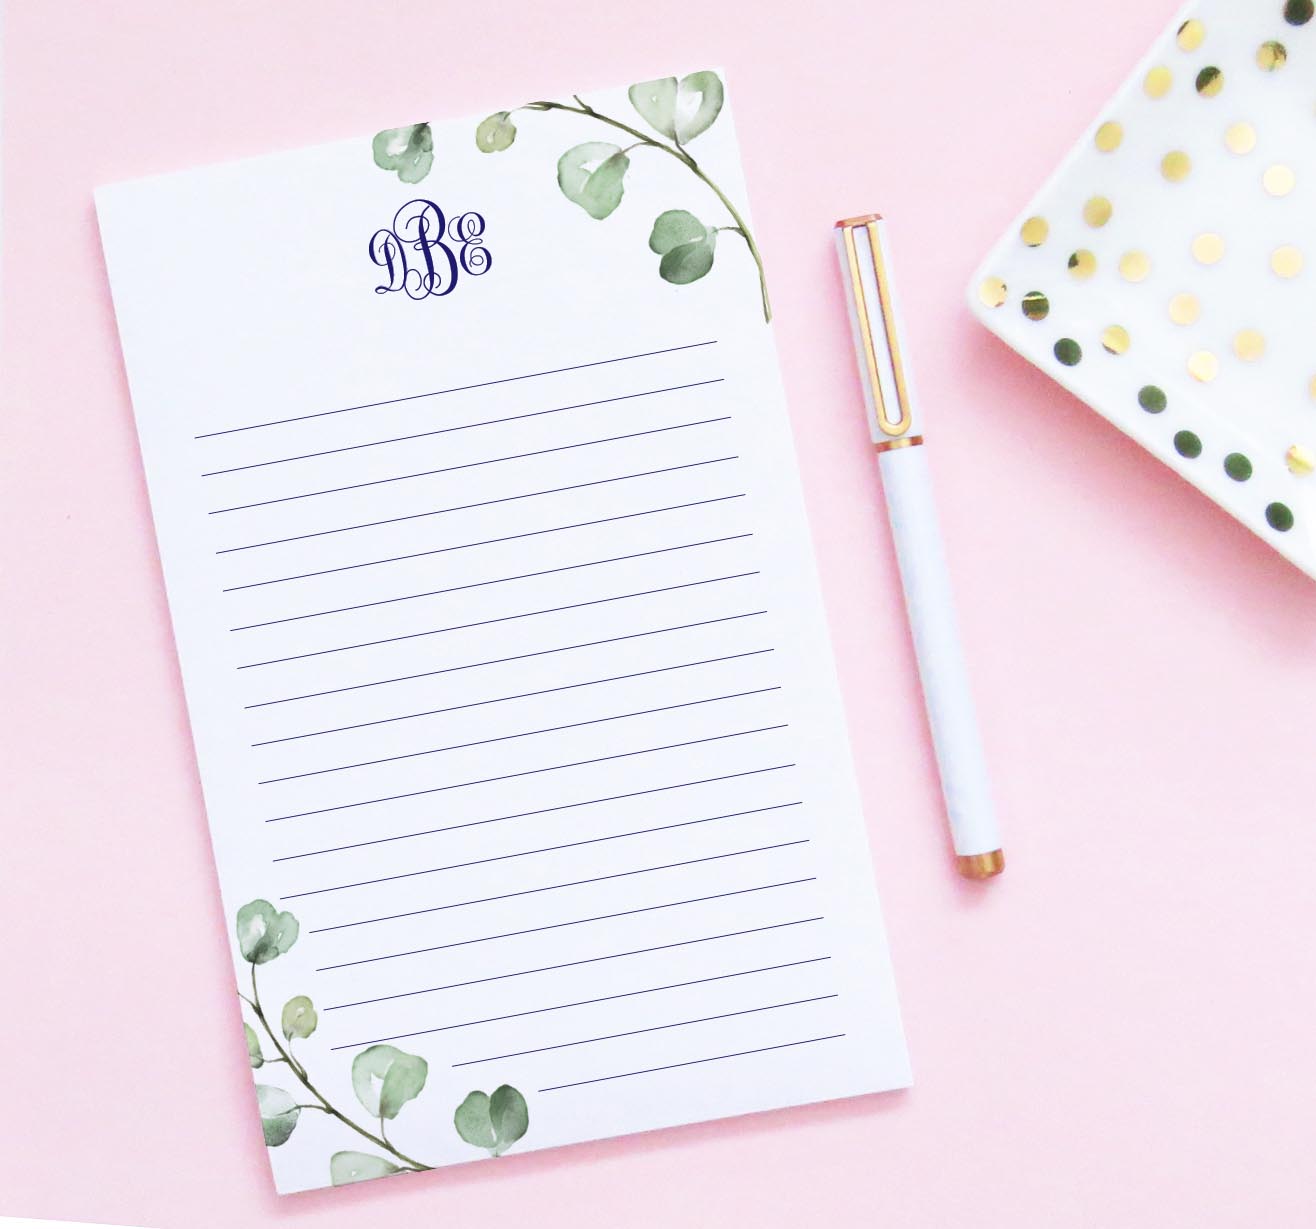 np278 Personalized Monogram Notepad with Eucalyptus Leaves greenery 3 letter